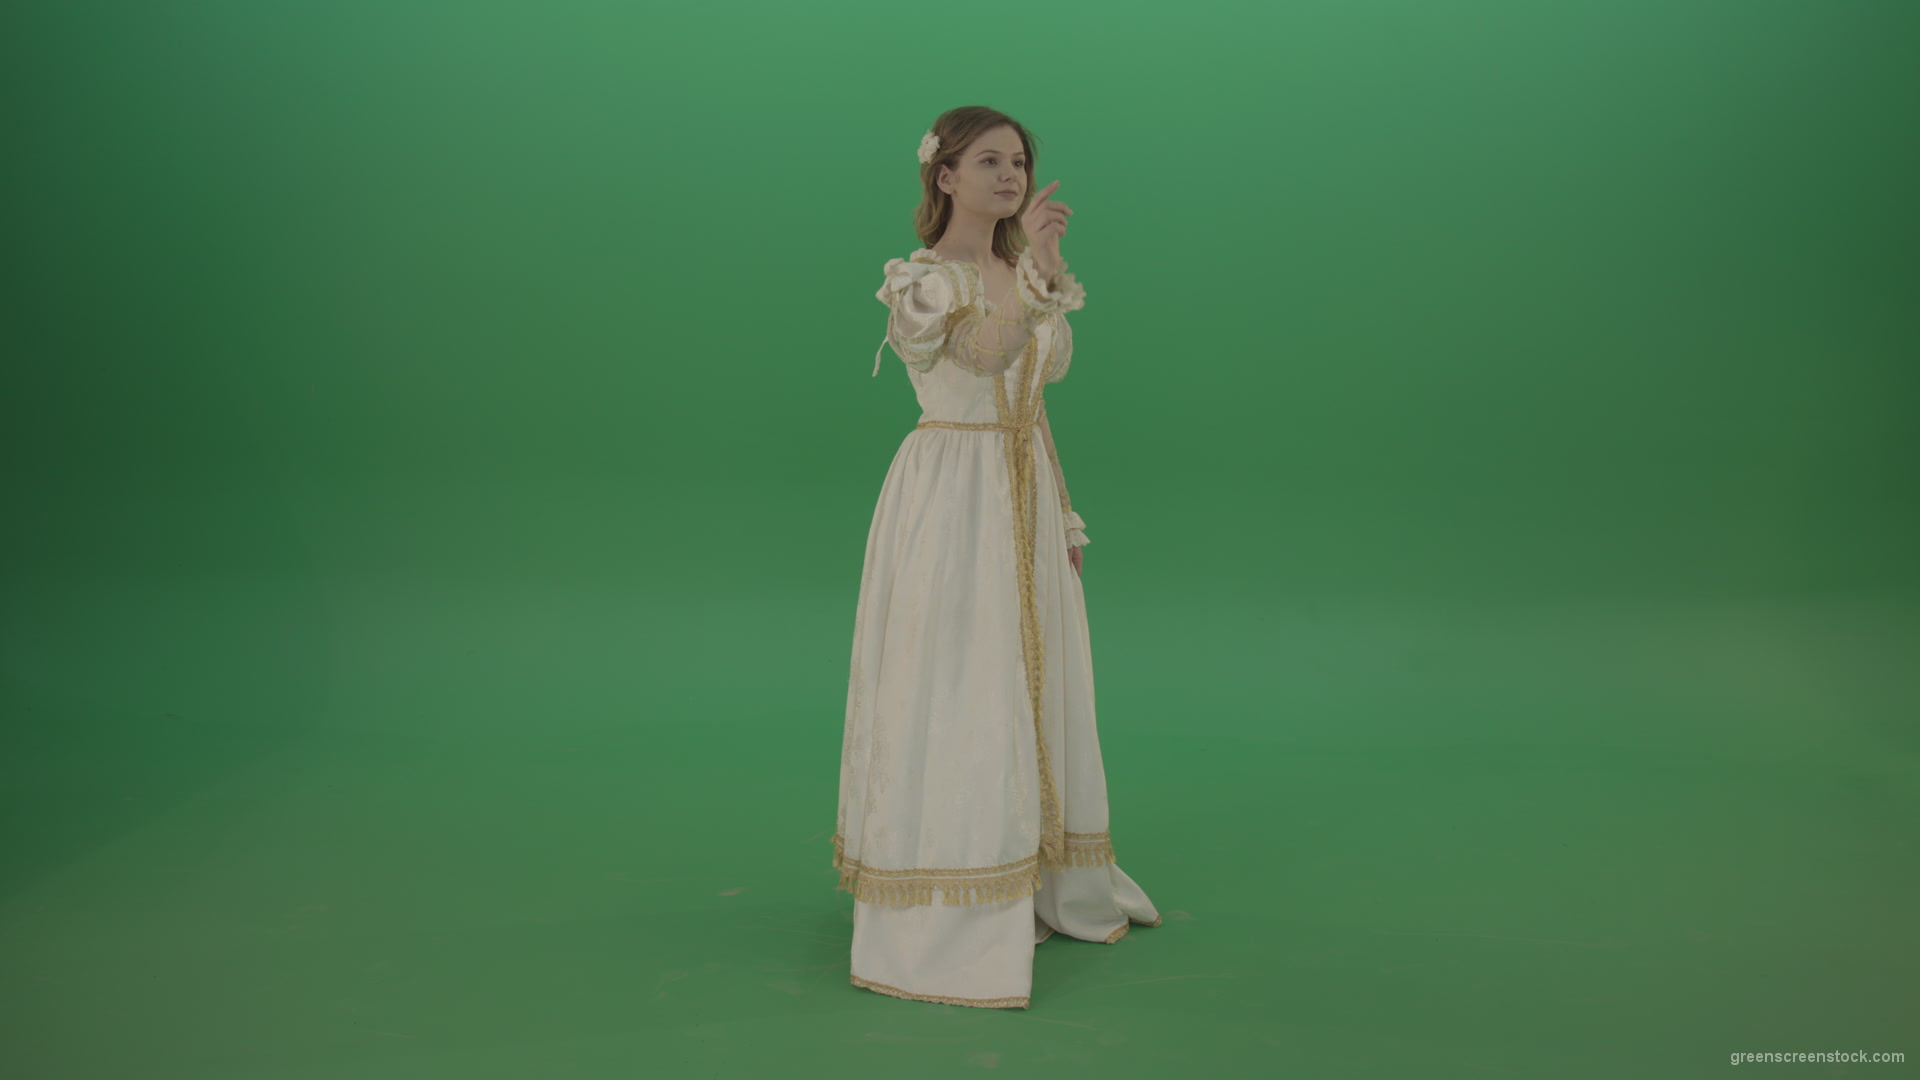 vj video background Flips-touchscreen-in-a-white-suit-of-a-medieval-woman-isolated-on-green-screen_003